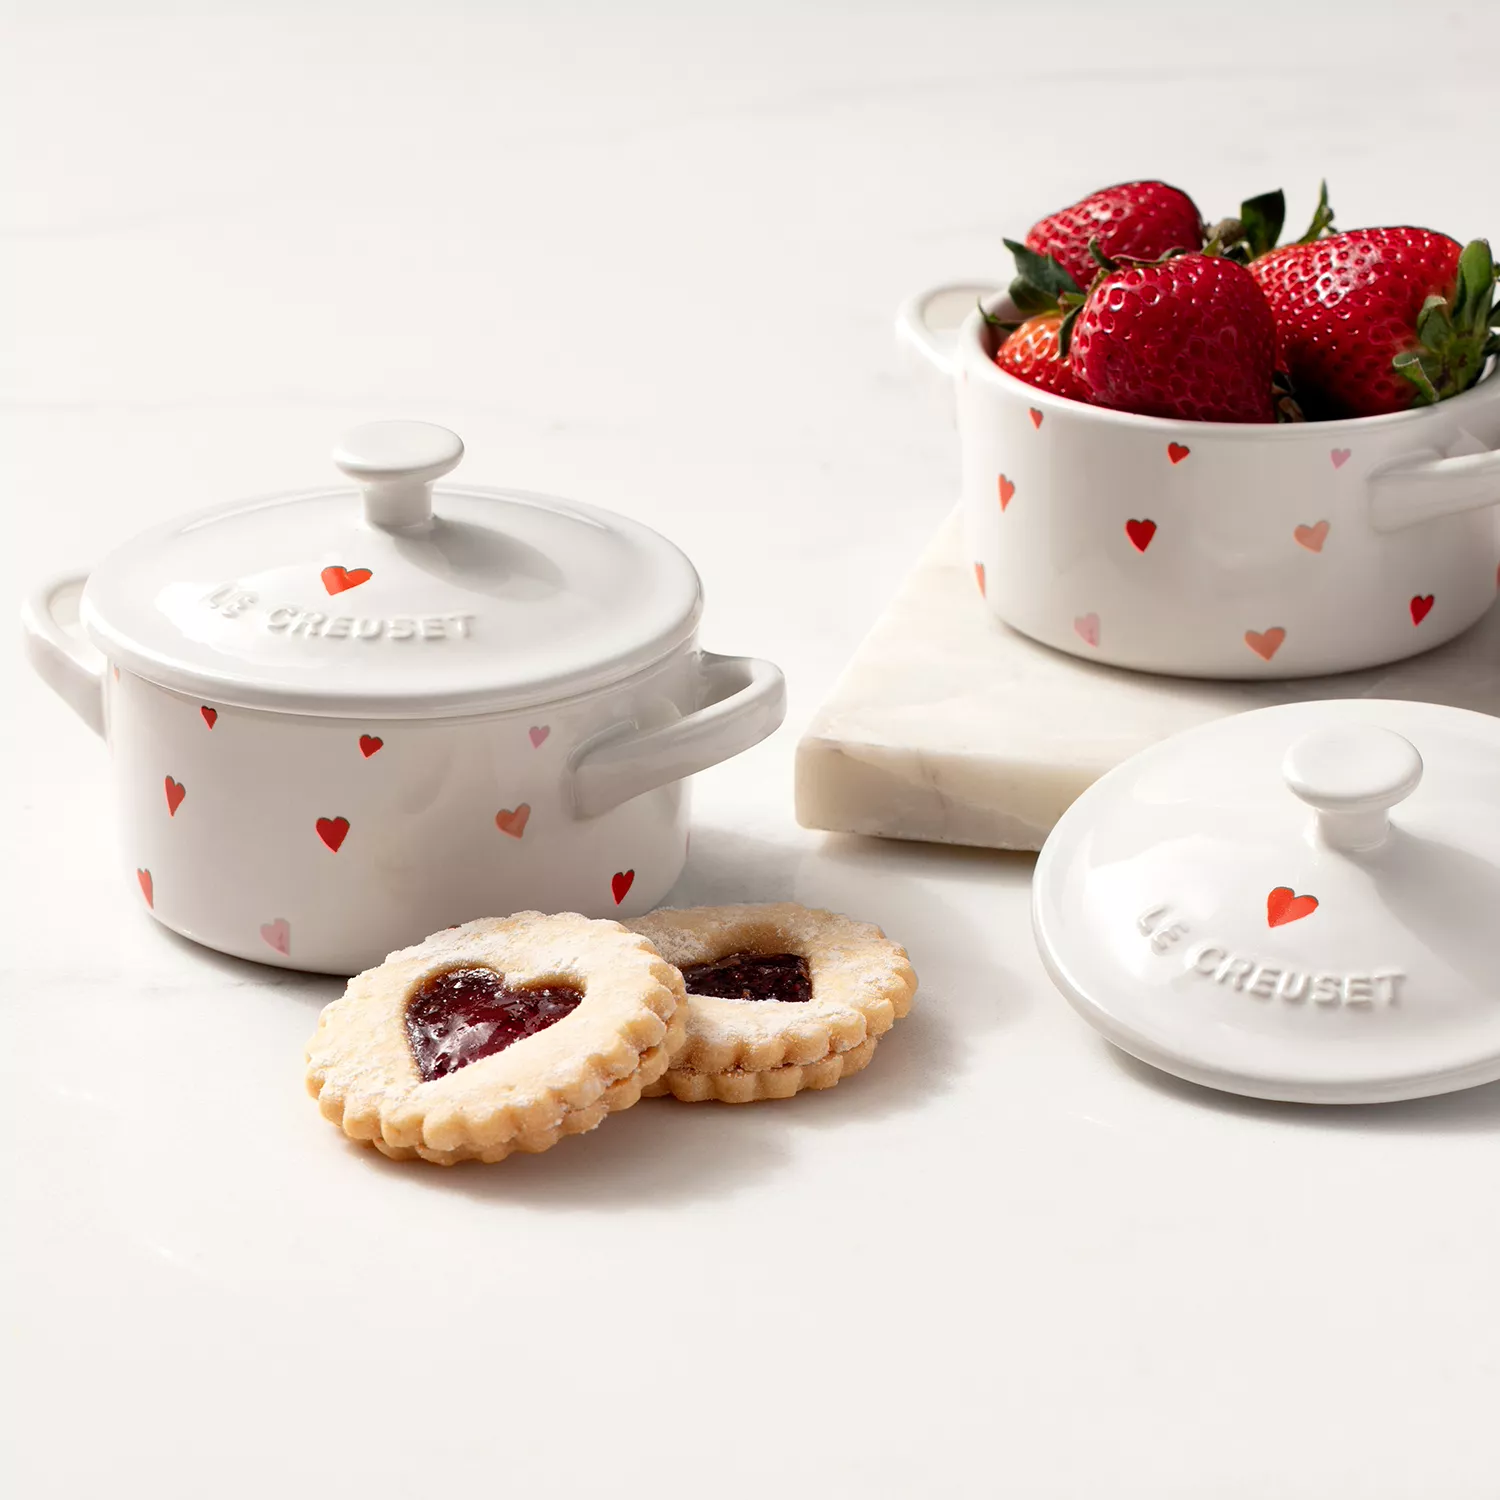 Le Creuset Valentine's Day Collection 2023 - Heart-Shaped Dutch Oven